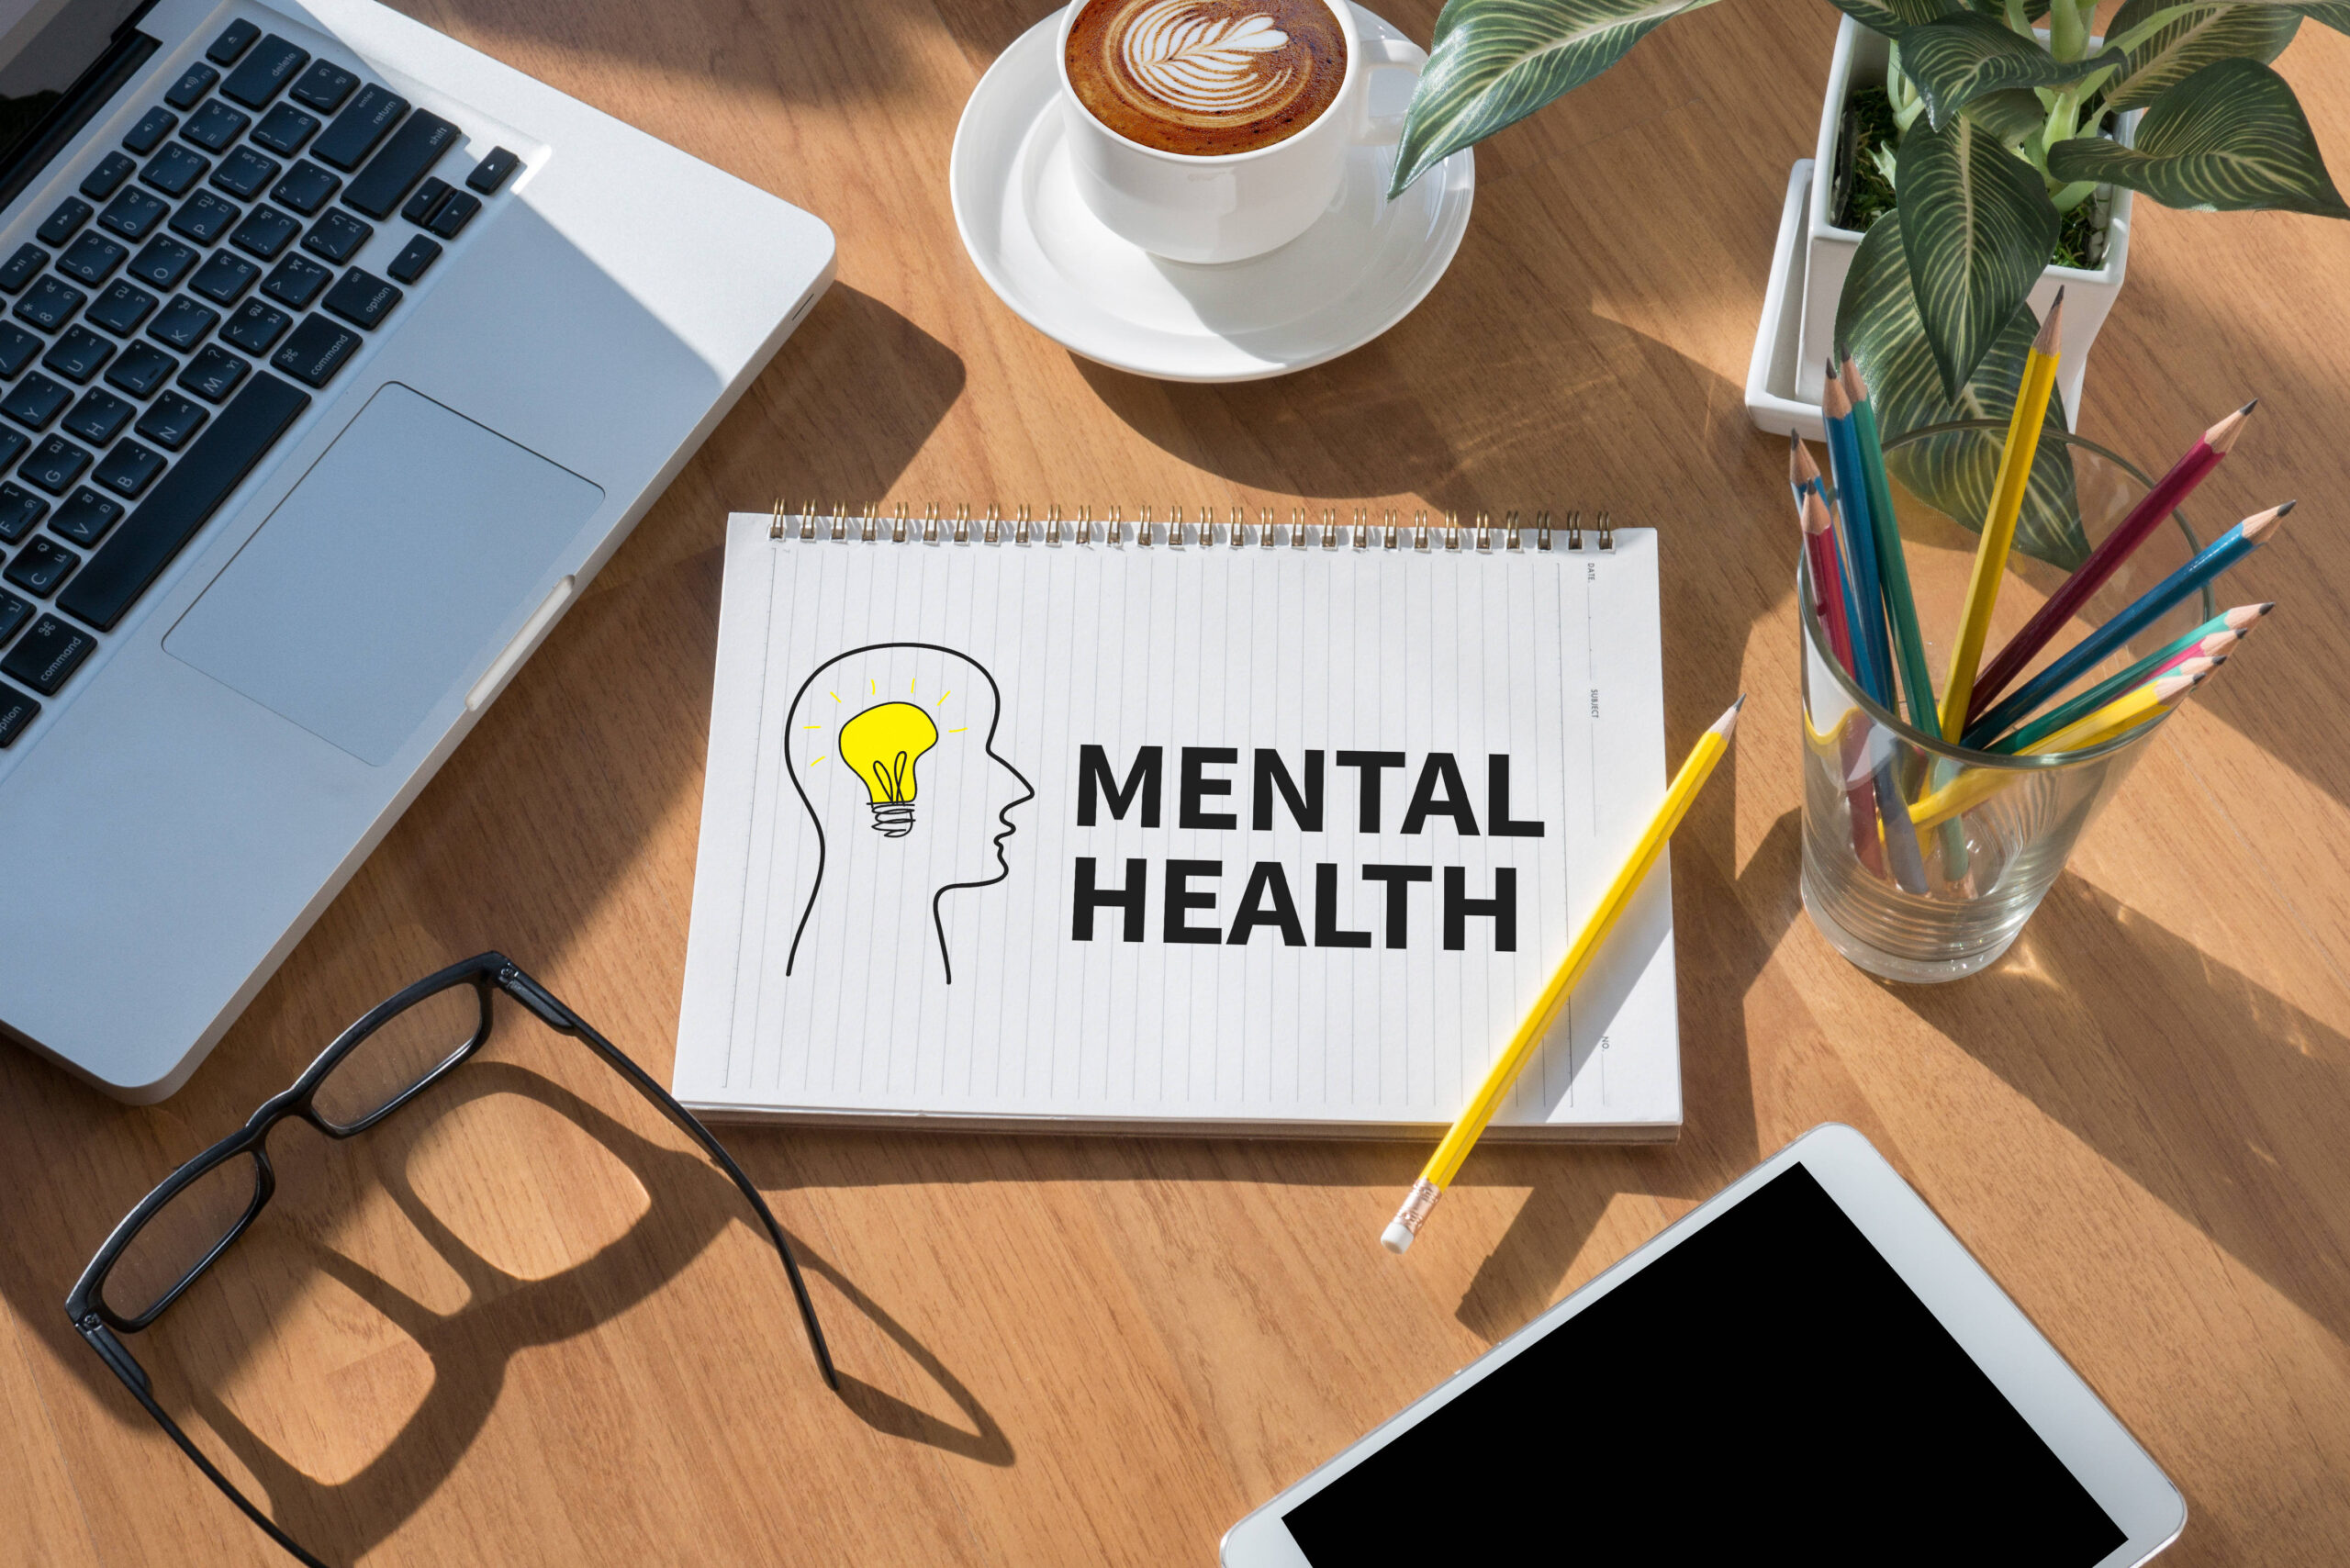 Top tips for mental wellbeing in the workplace